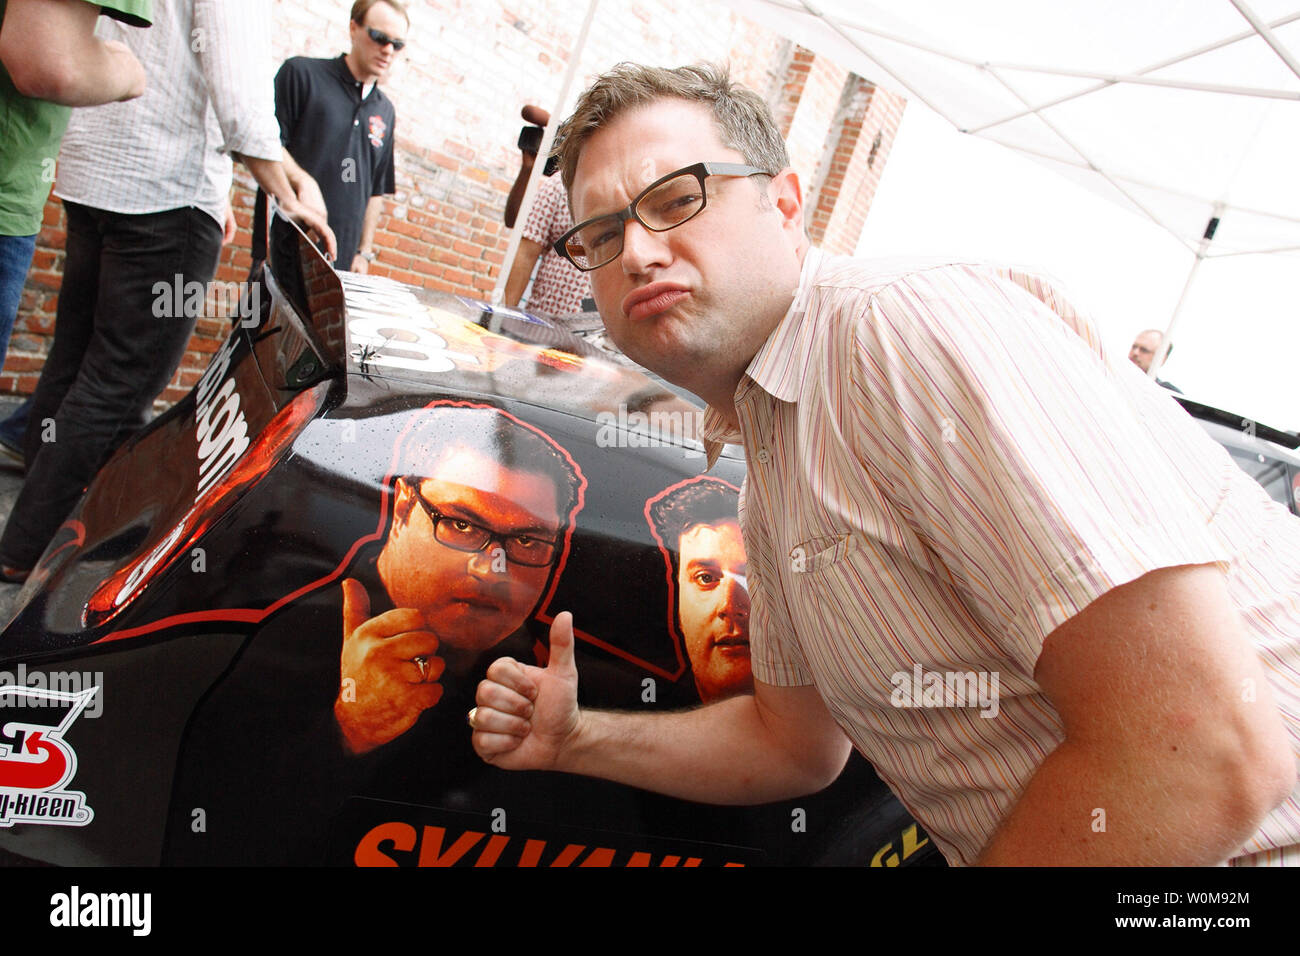 Steven Page of the band Barenaked Ladies approves of his photo on NASCAR driver Kevin Harvick's #29 GM Goodwrench Chevy Monte Carlo SS racecar at XM Satellite Radio headquarters in Washington, DC on July 13, 2006. Chevrolet announced the Barenaked Ladies will perform the pre-race concert at the Chevy Rock & Roll 400. The race, that takes place September 9 at Richmond International Raceway, will feature Harvick in the Barenaked Ladies racecar. (UPI Photo/Tyler Mallory/General Motors) Stock Photo